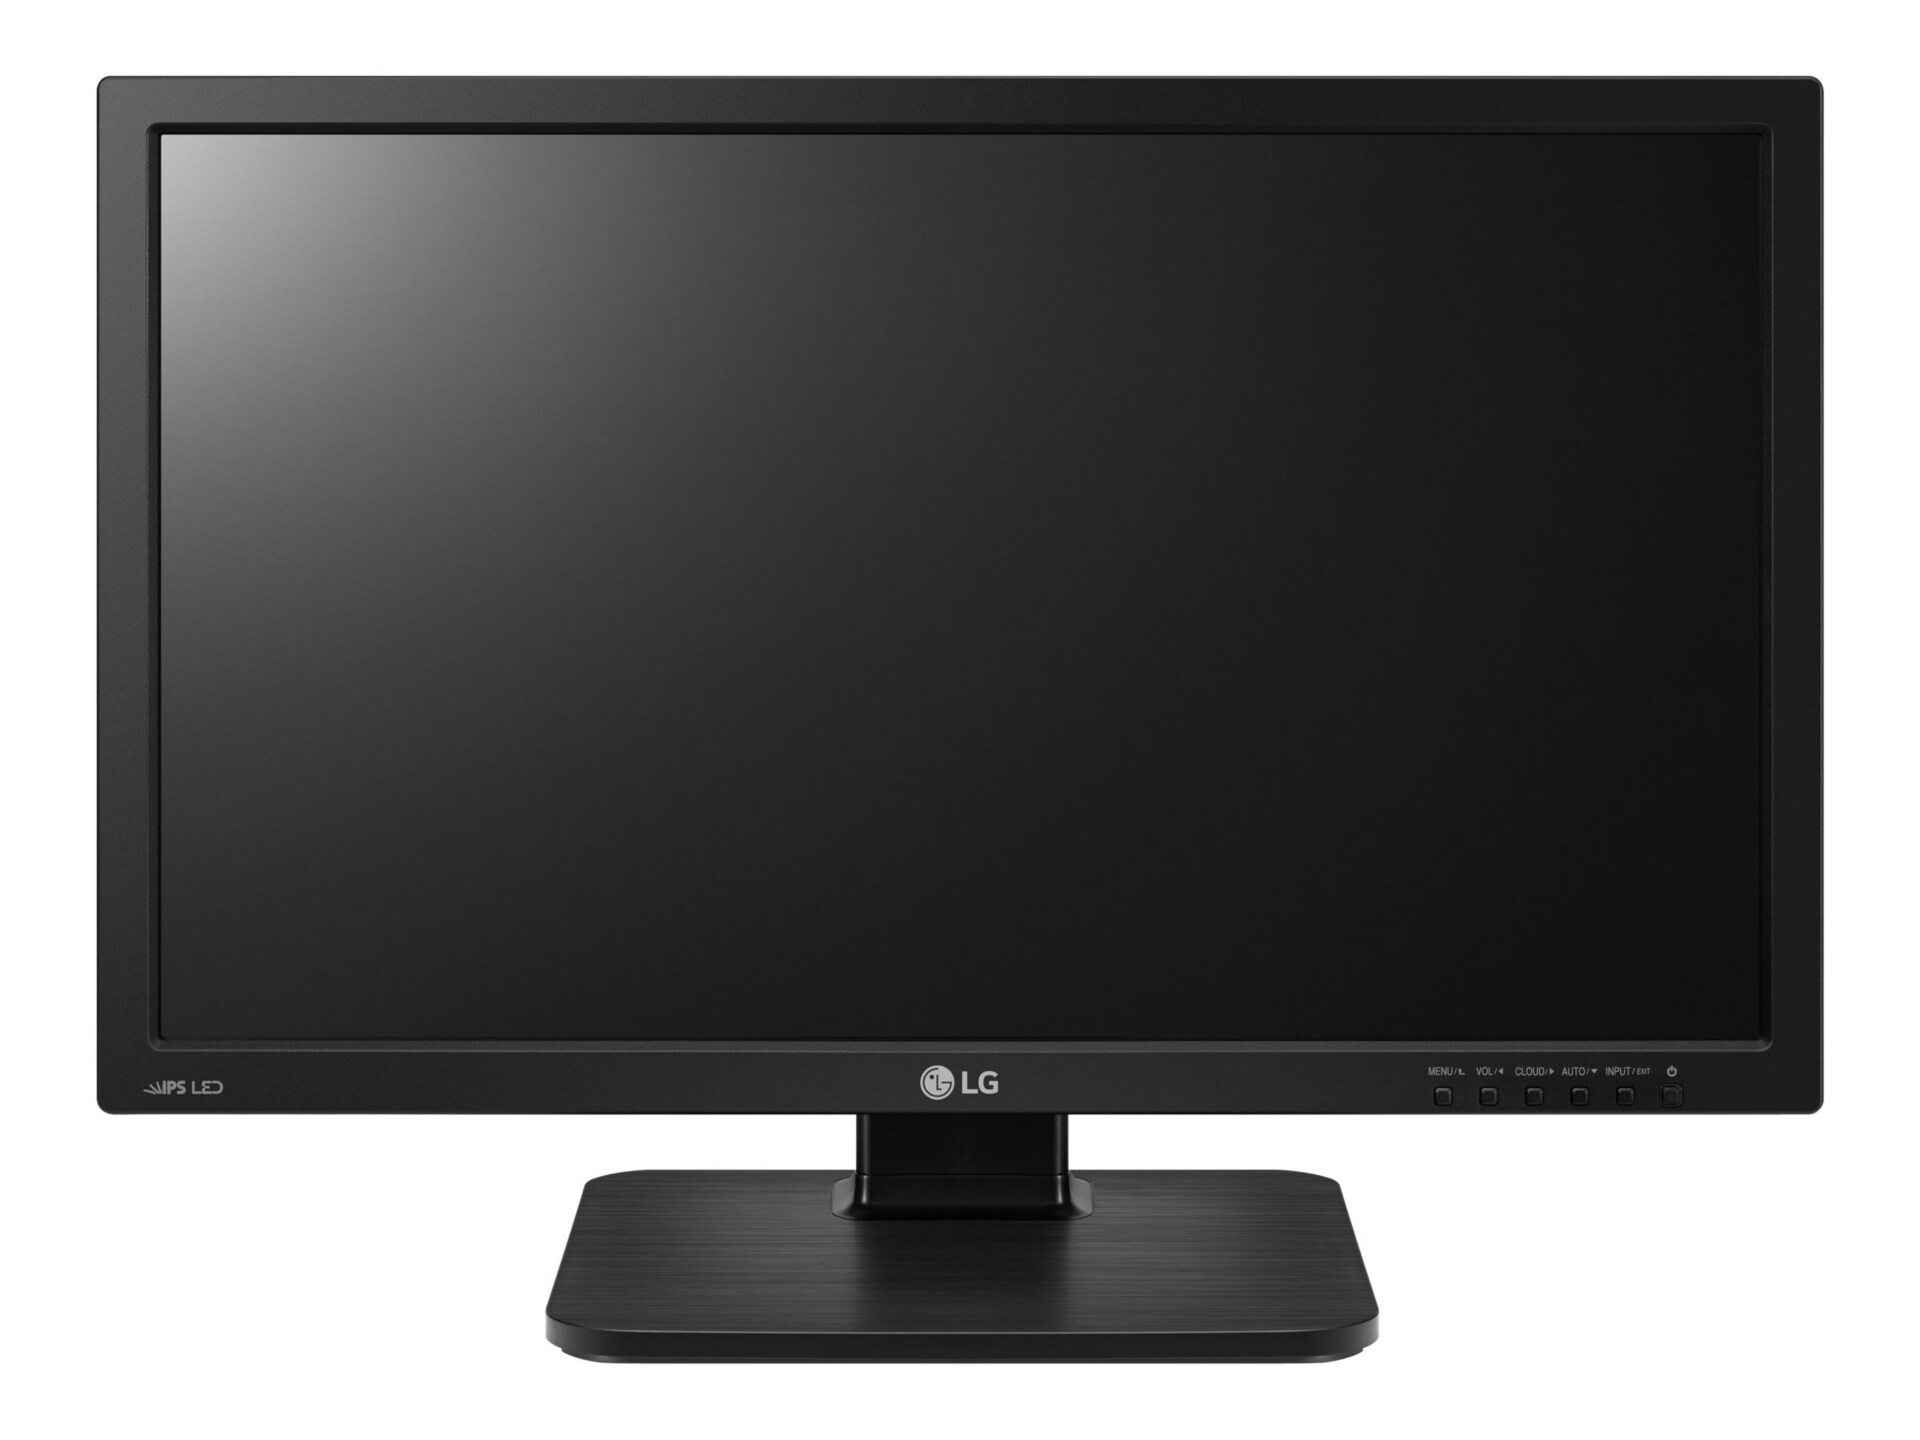 LG 24CAV37K-B – PCOIP Zero Client – Tera2321 – 24” LED – all-in-one – 512MB